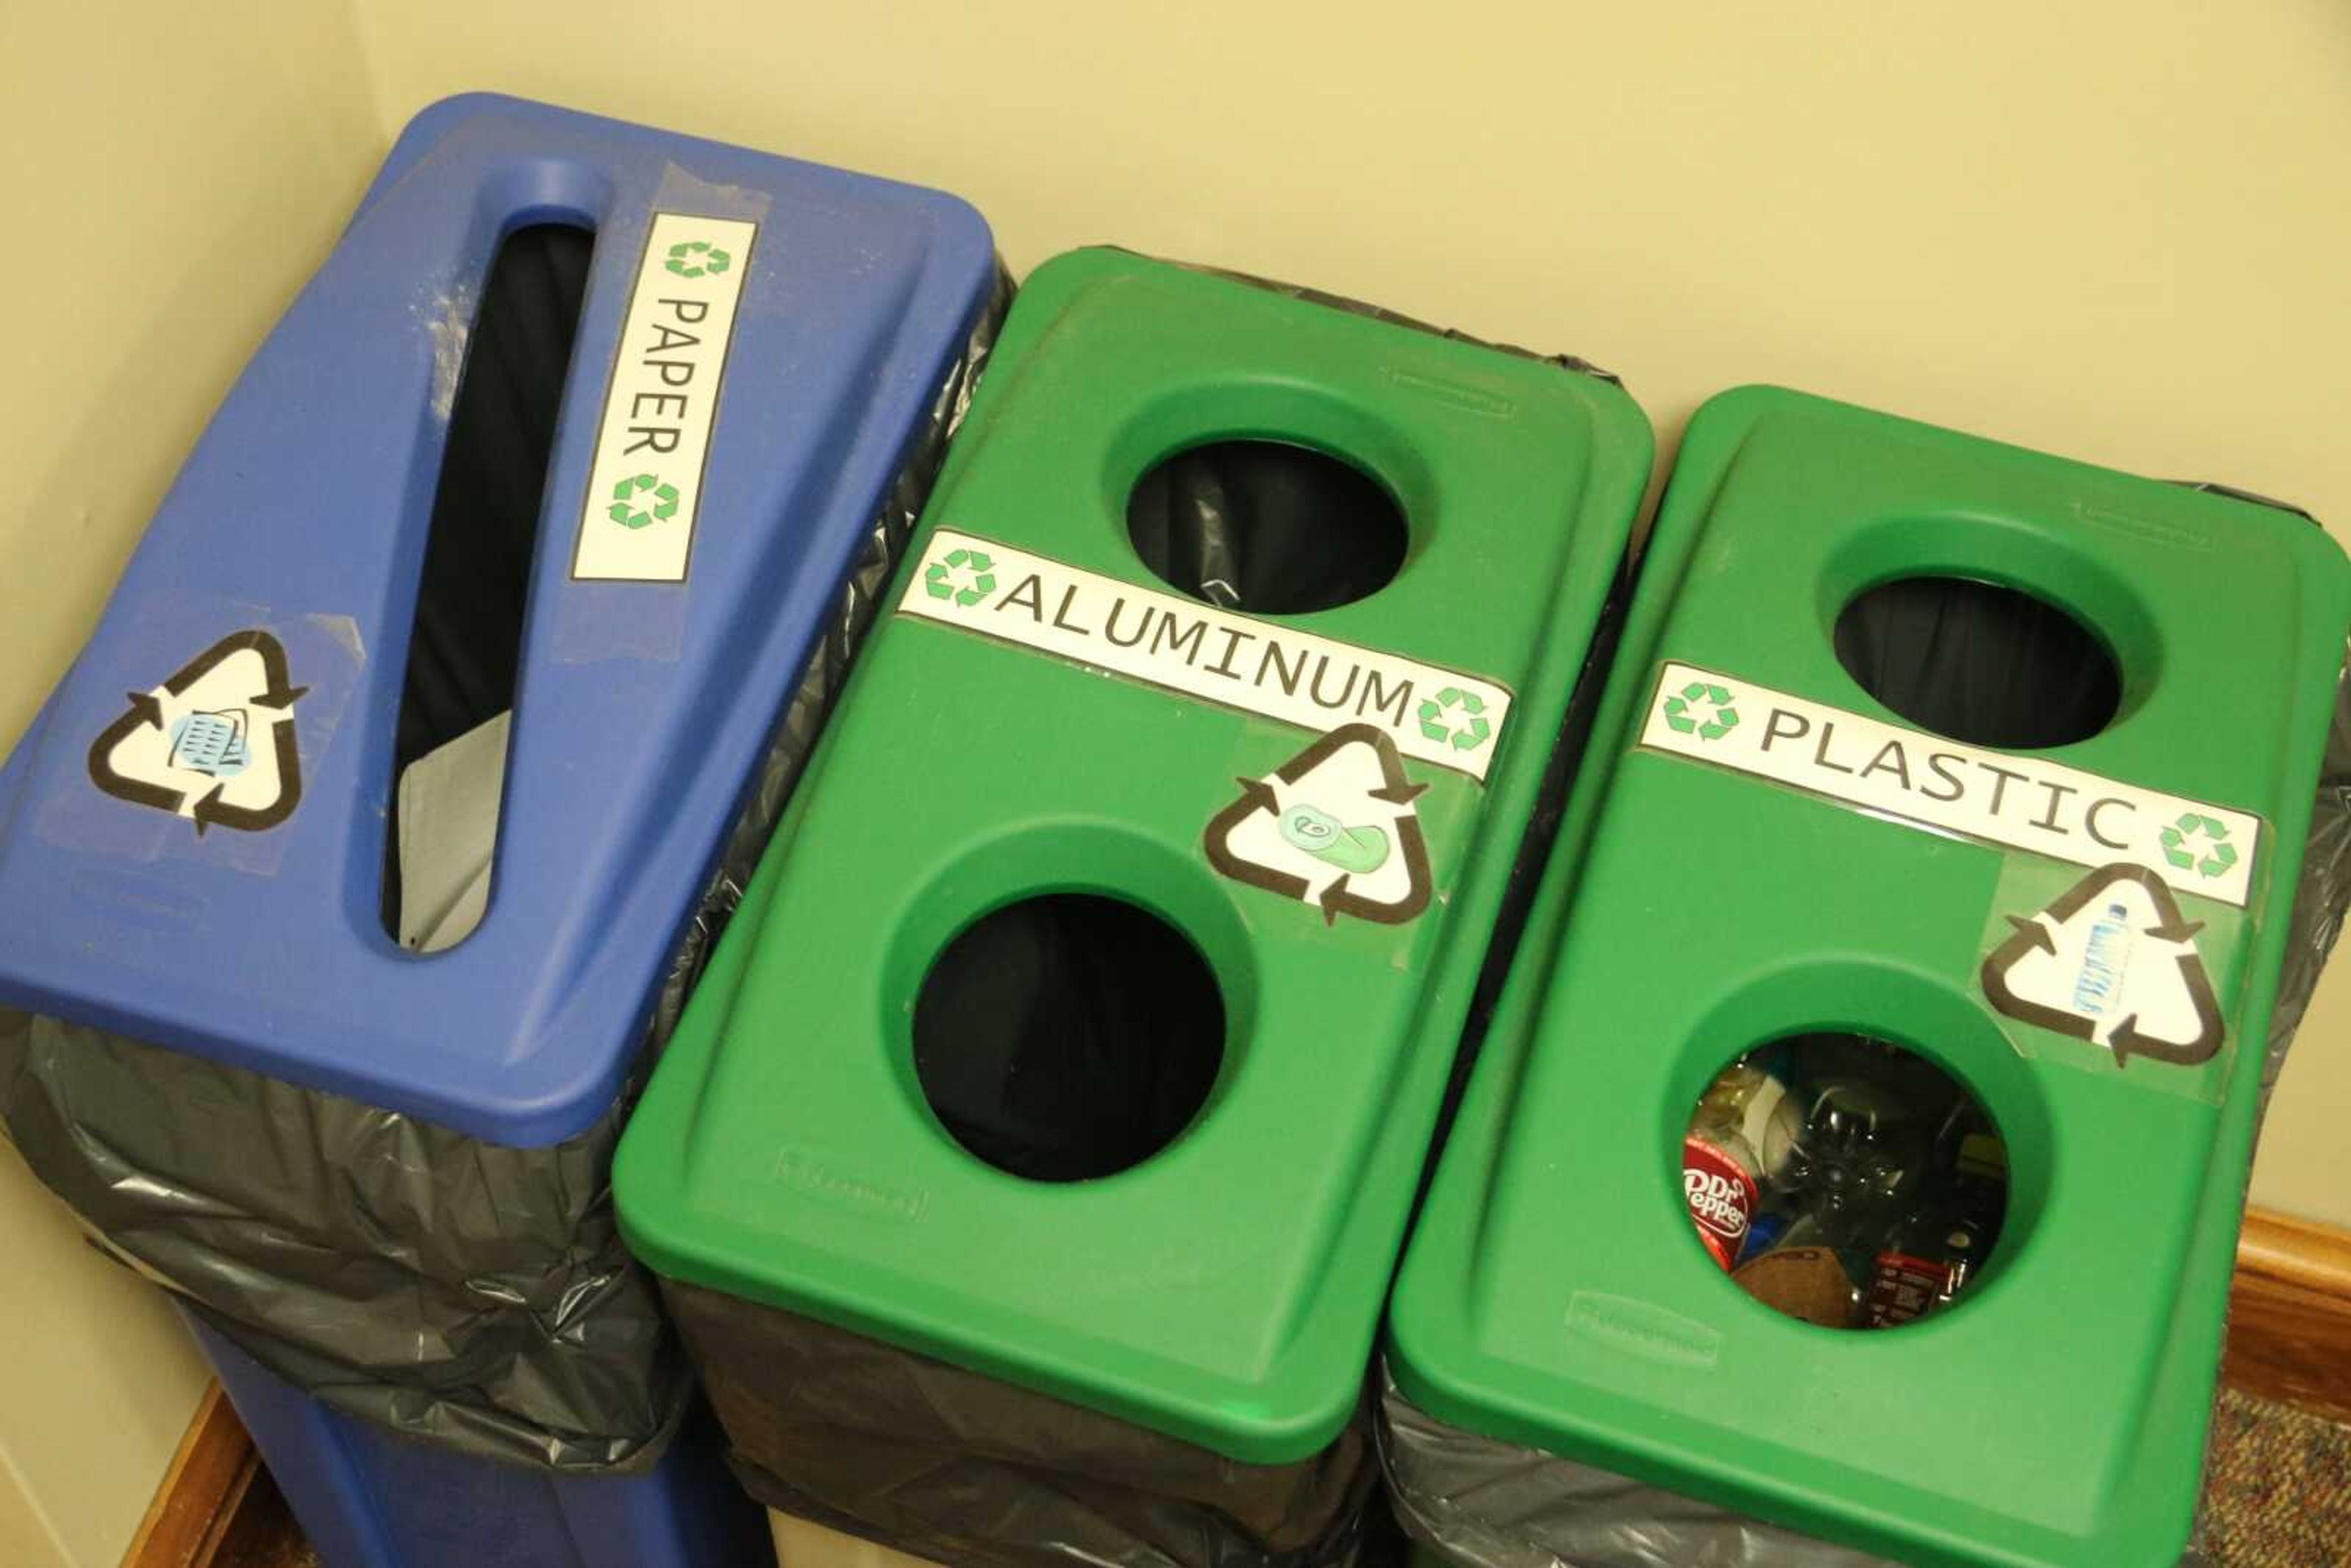 Some of the initiatives for sustainability on campus include reserved parking spaces for those who share a ride to campus and special separated recycling bins.